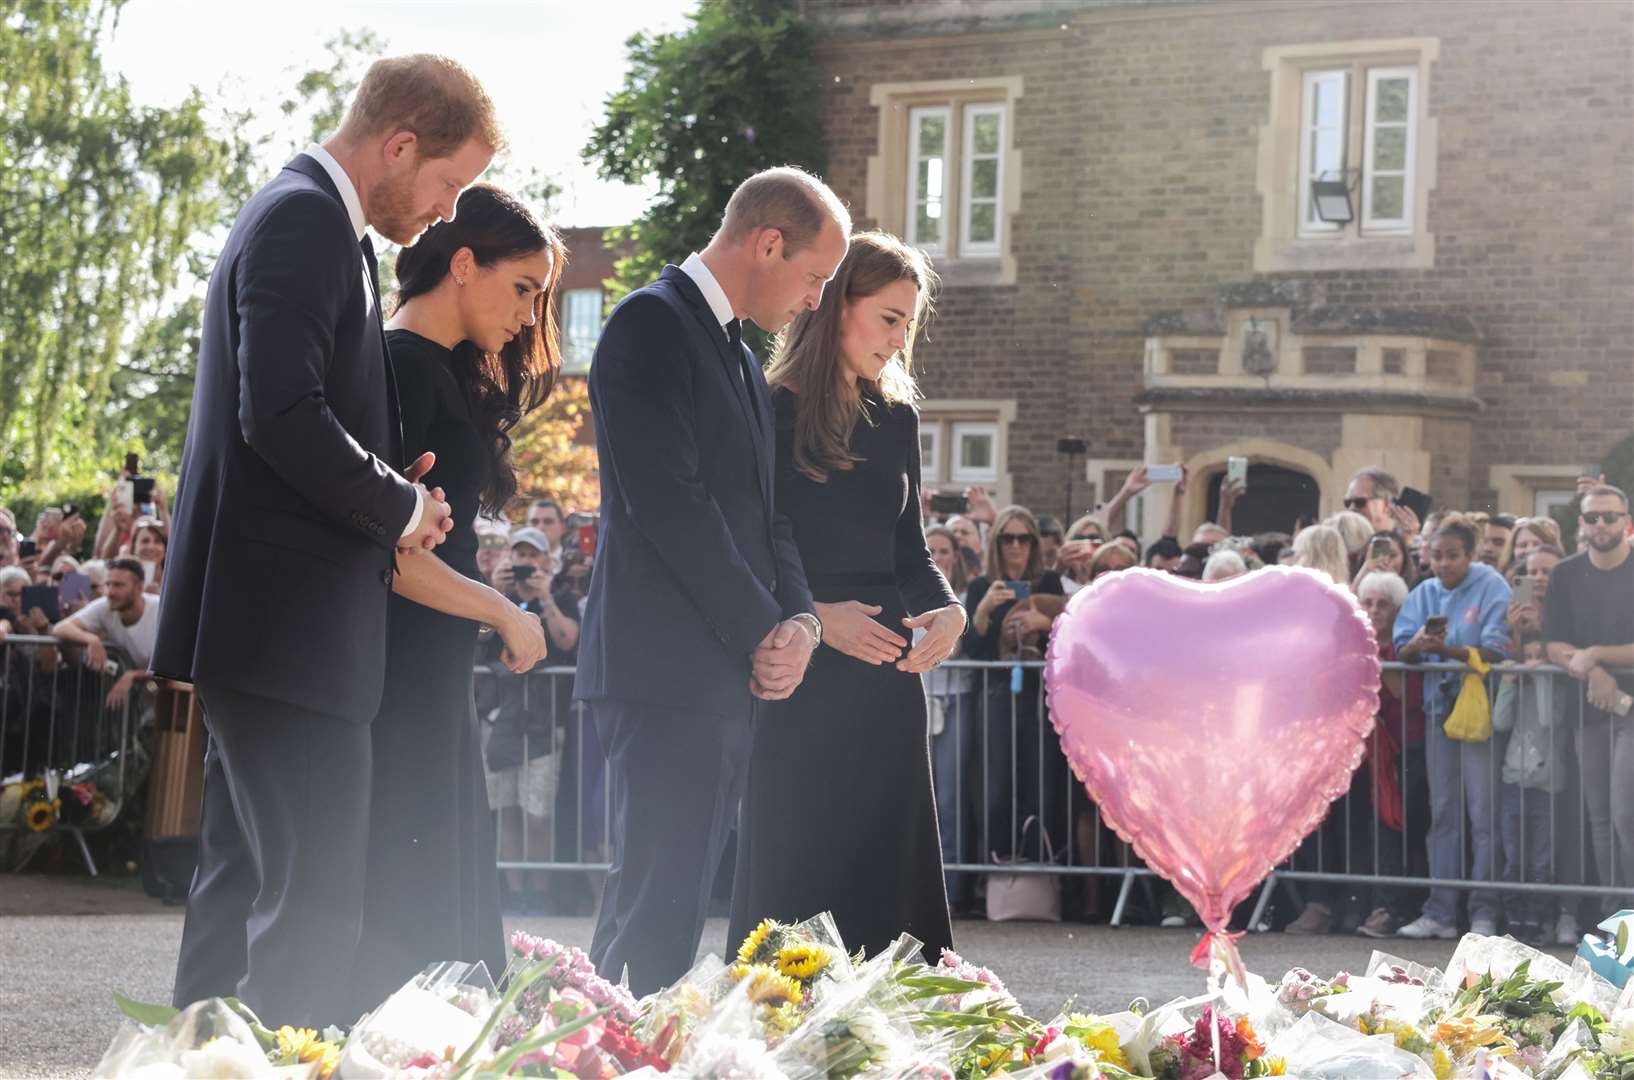 The Prince and Princess of Wales and the Duke and Duchess of Sussex viewing the messages and floral tributes (Chris Jackson/PA)